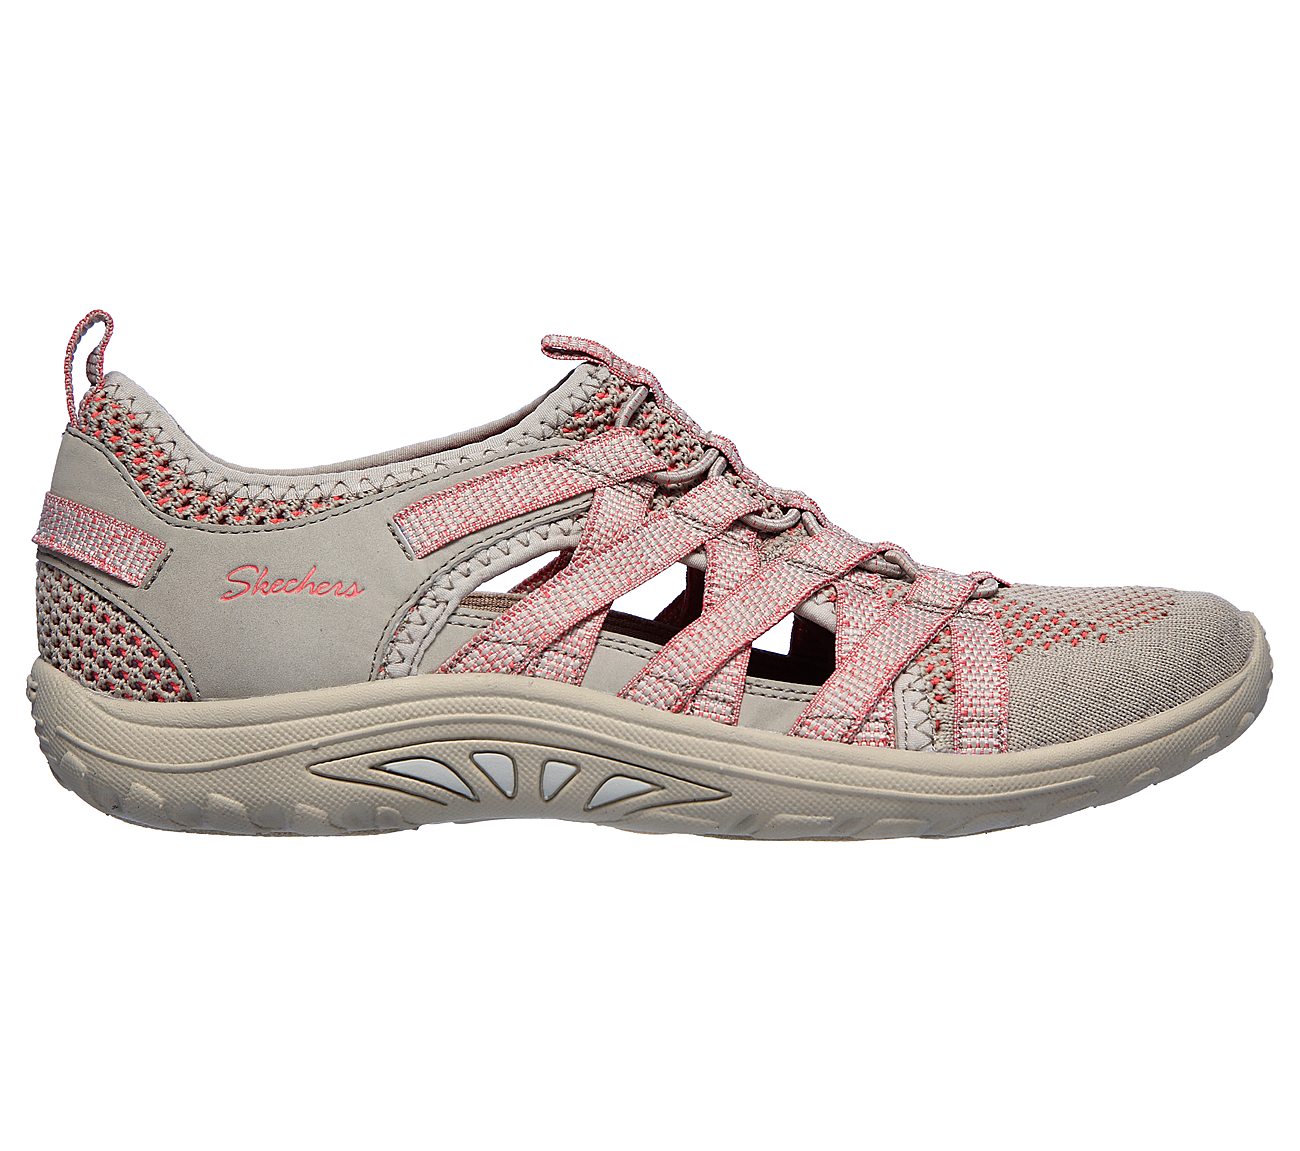 skechers relaxed fit mujer gris